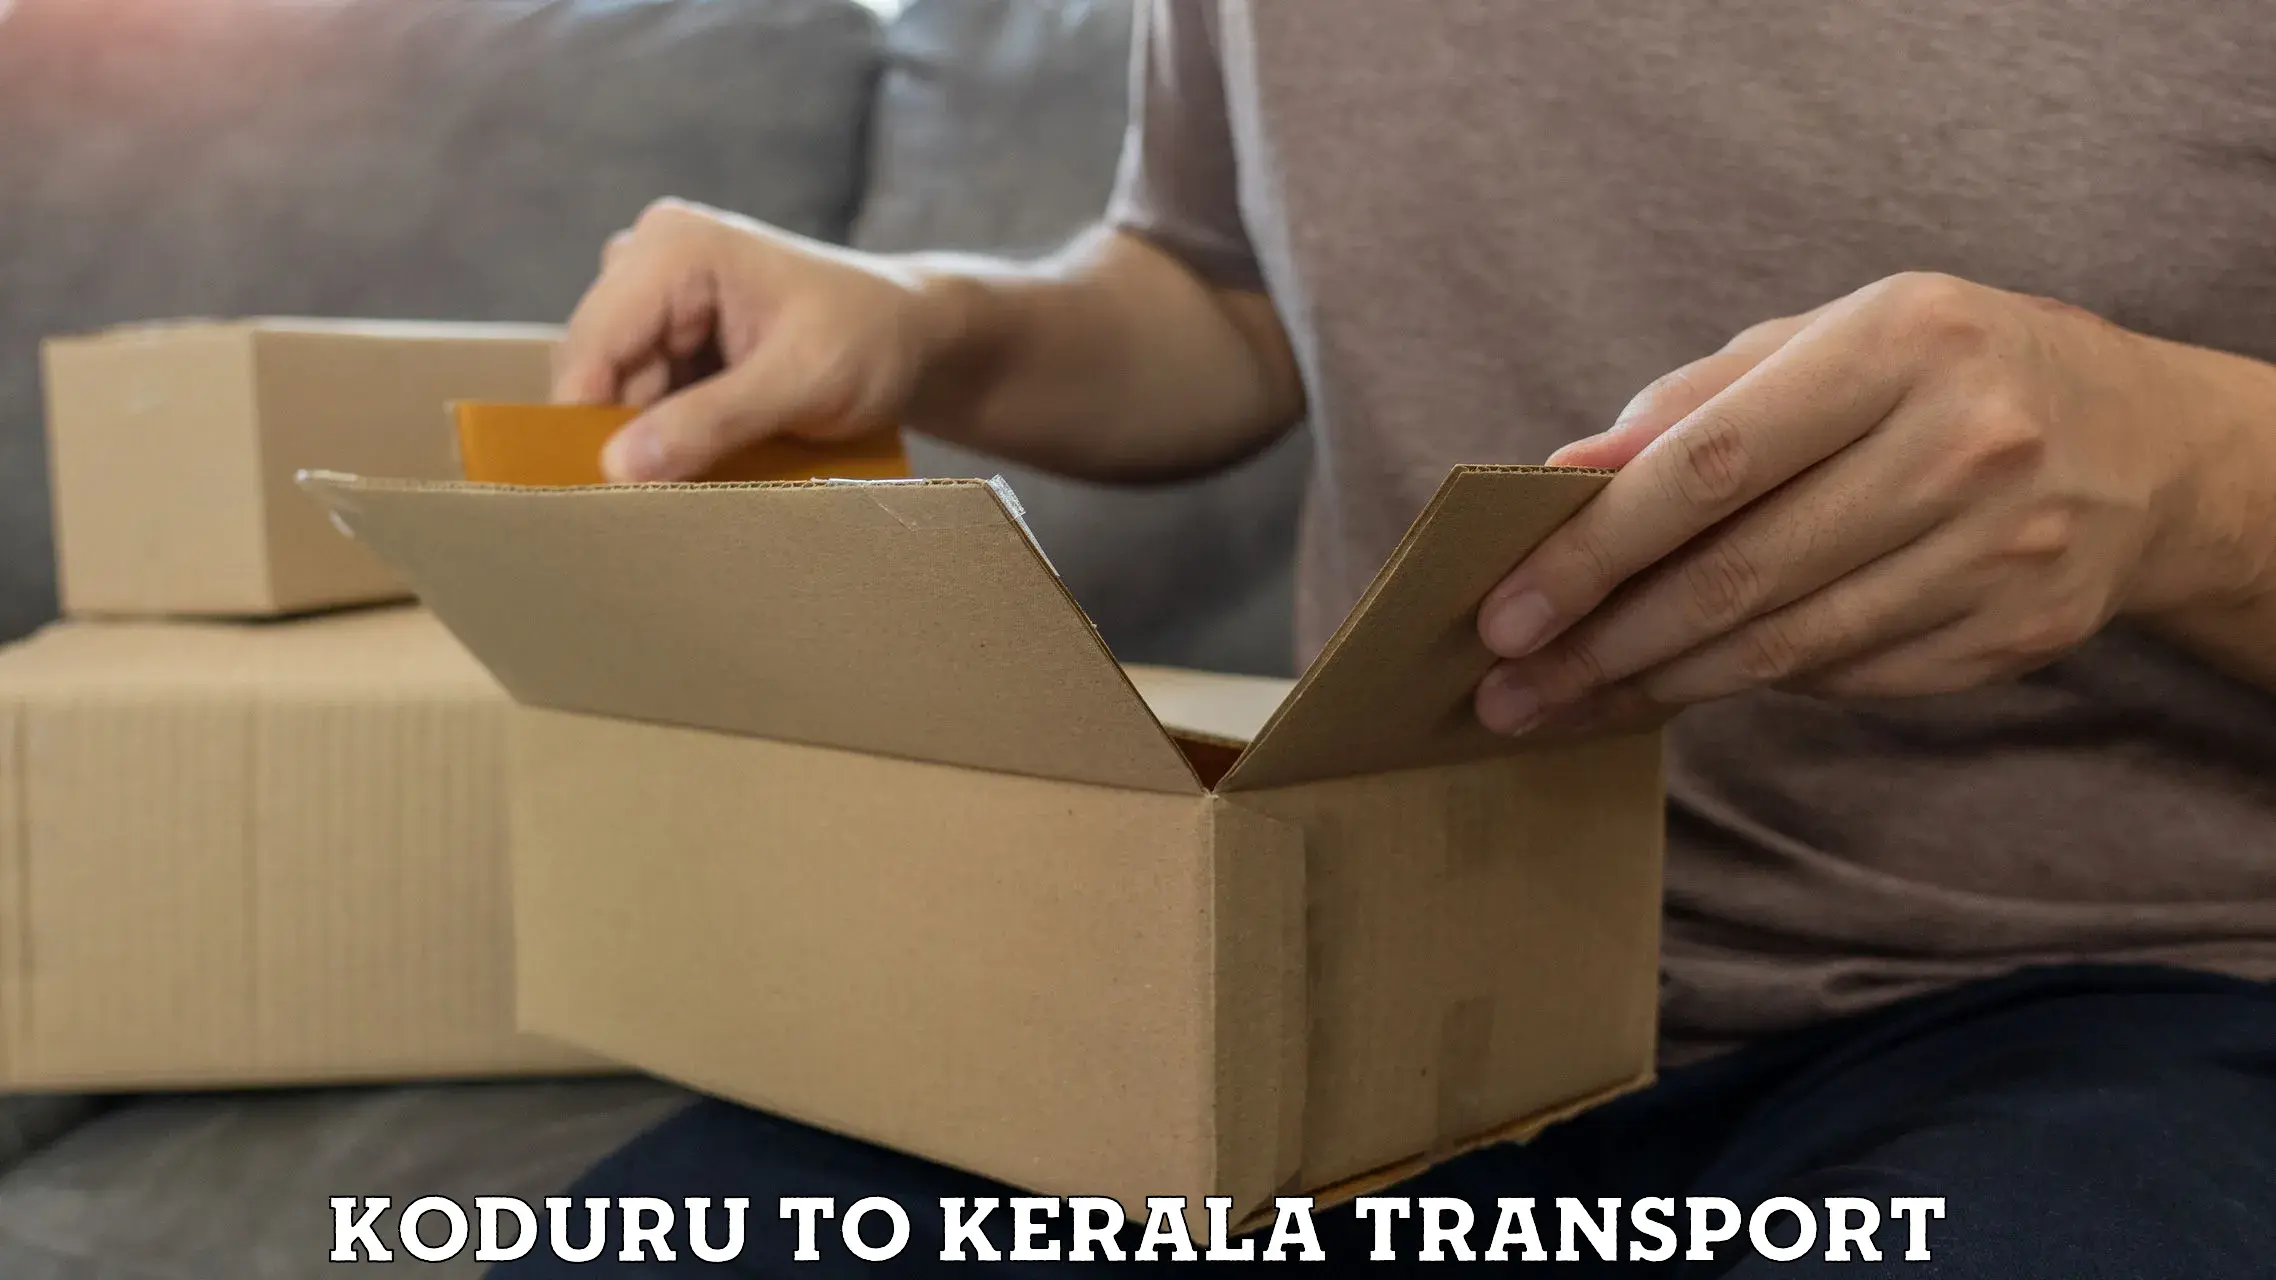 Transport bike from one state to another Koduru to Kerala